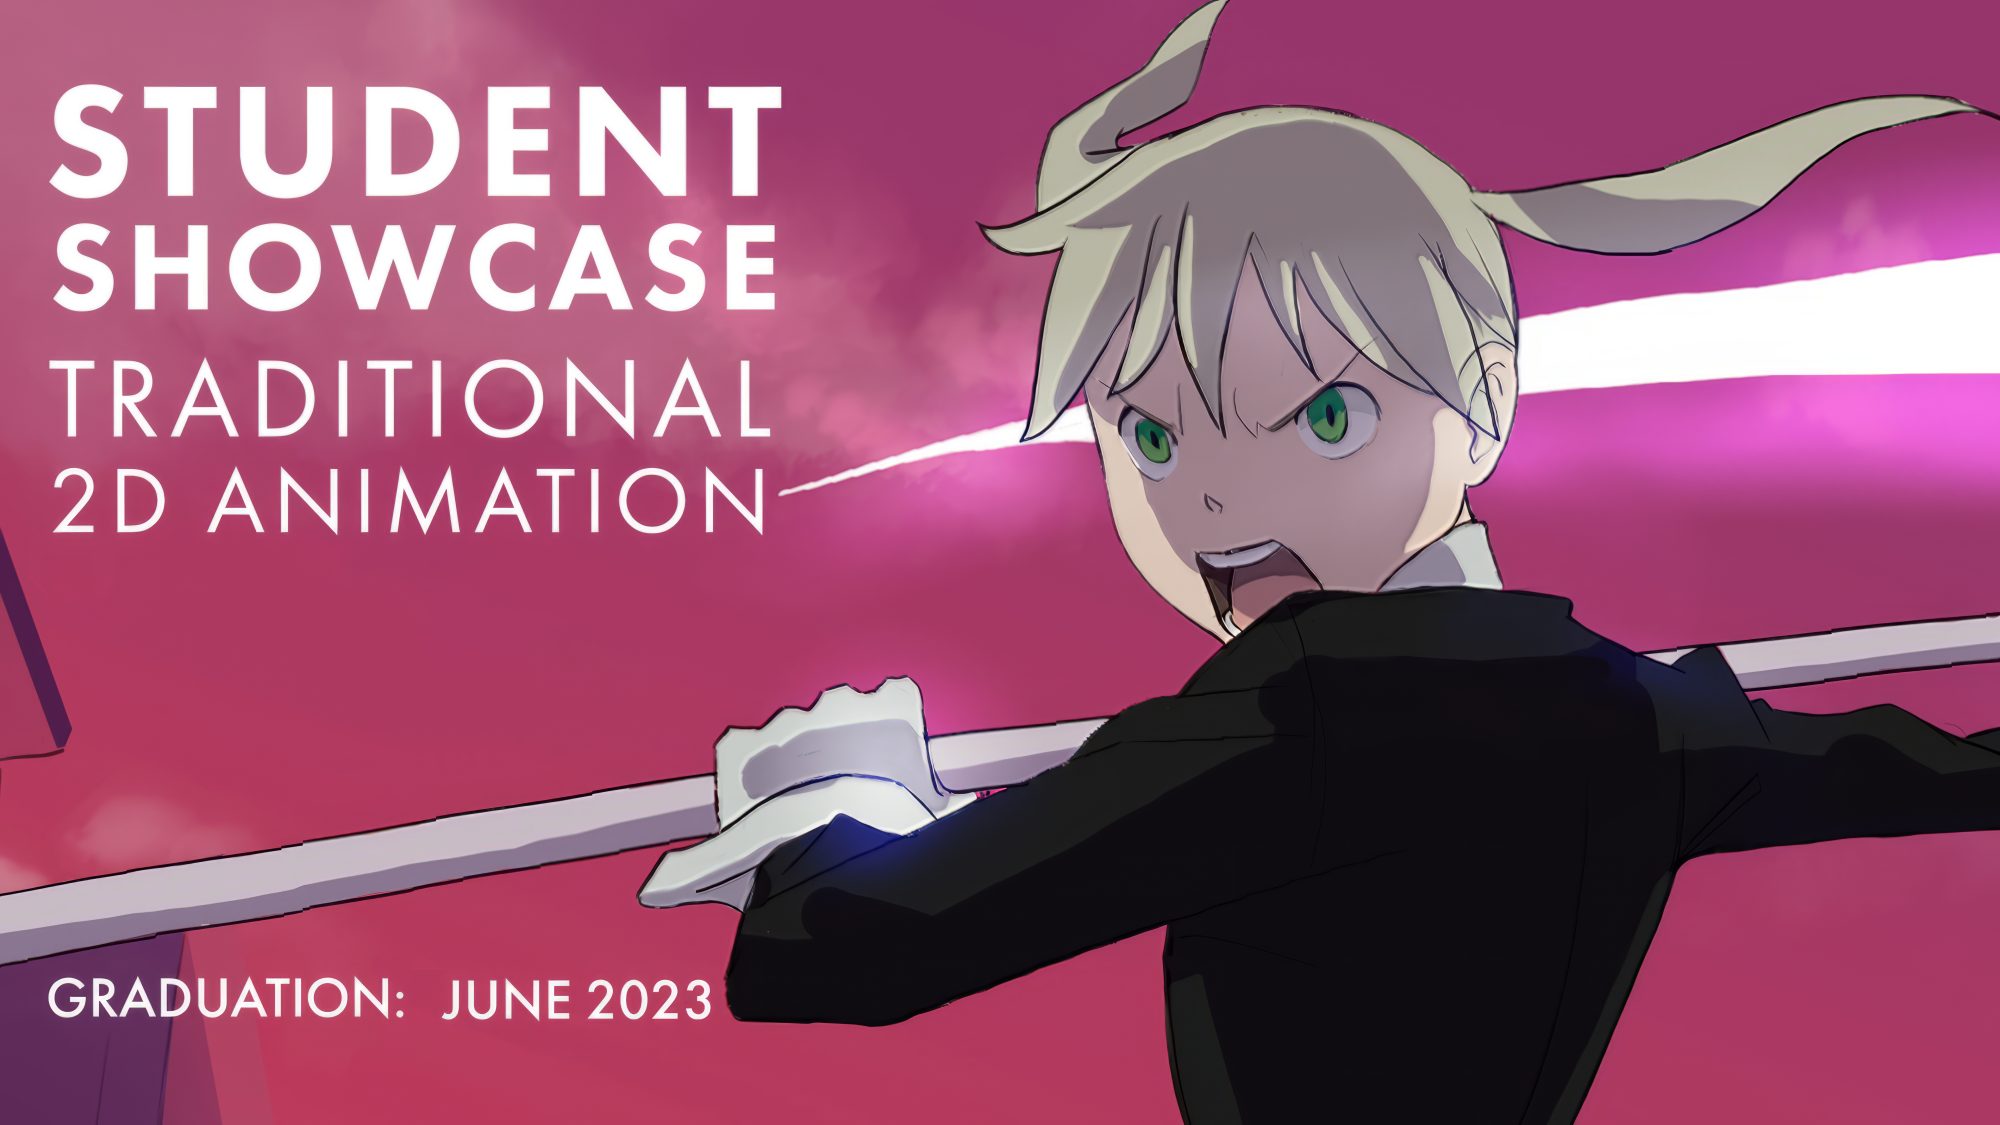 Students showcase. Traditional 2D animation. June 2023